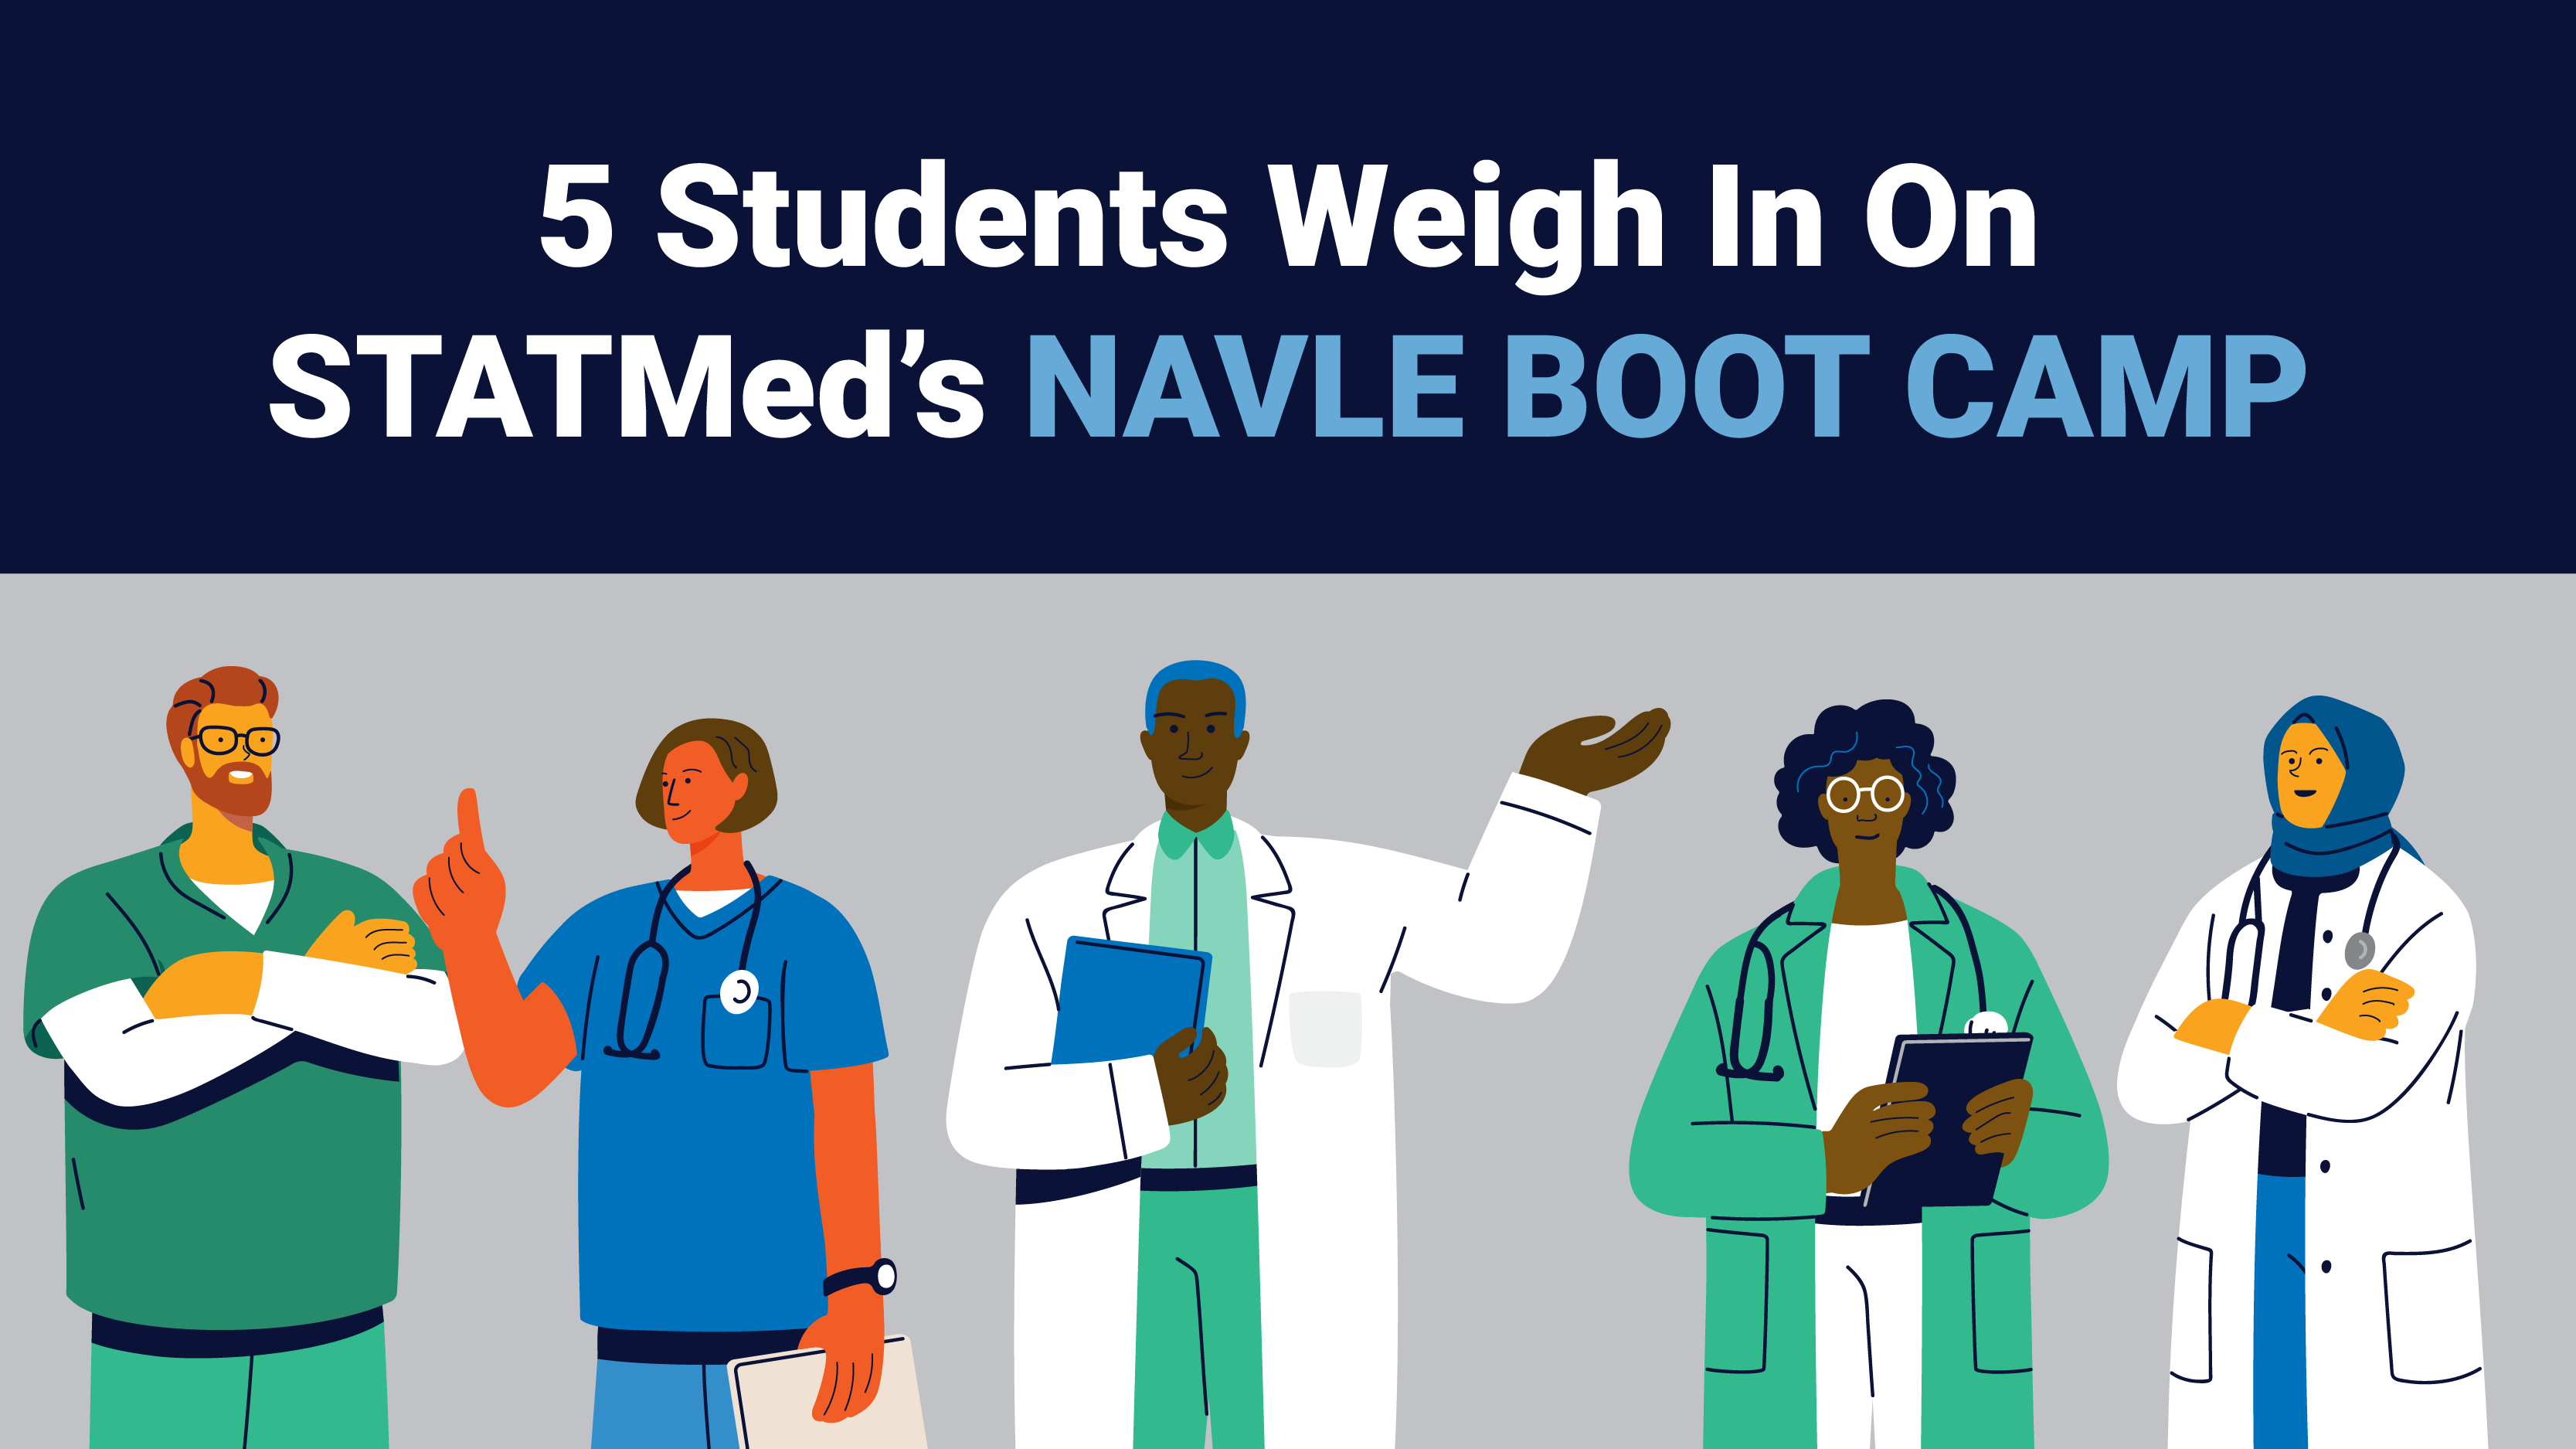 Featured image for “5 students weigh in on STATMed’s NAVLE BOOT CAMP”